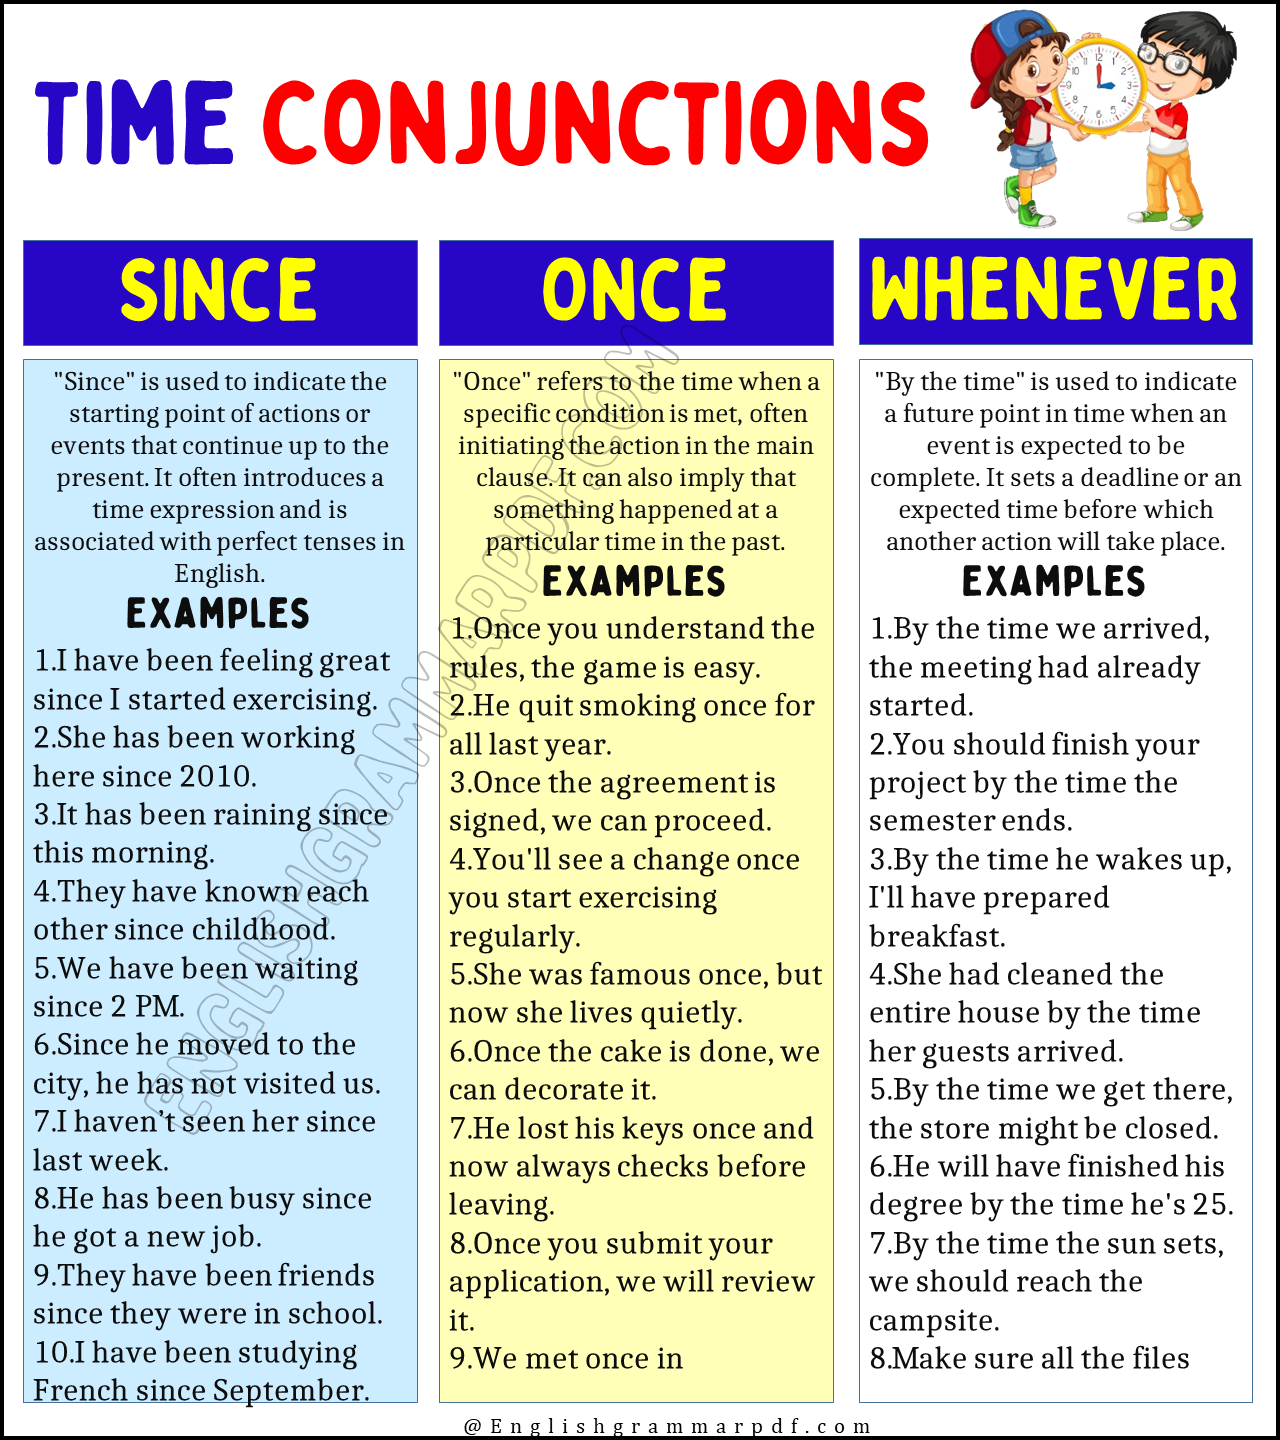 Time Conjunctions in English